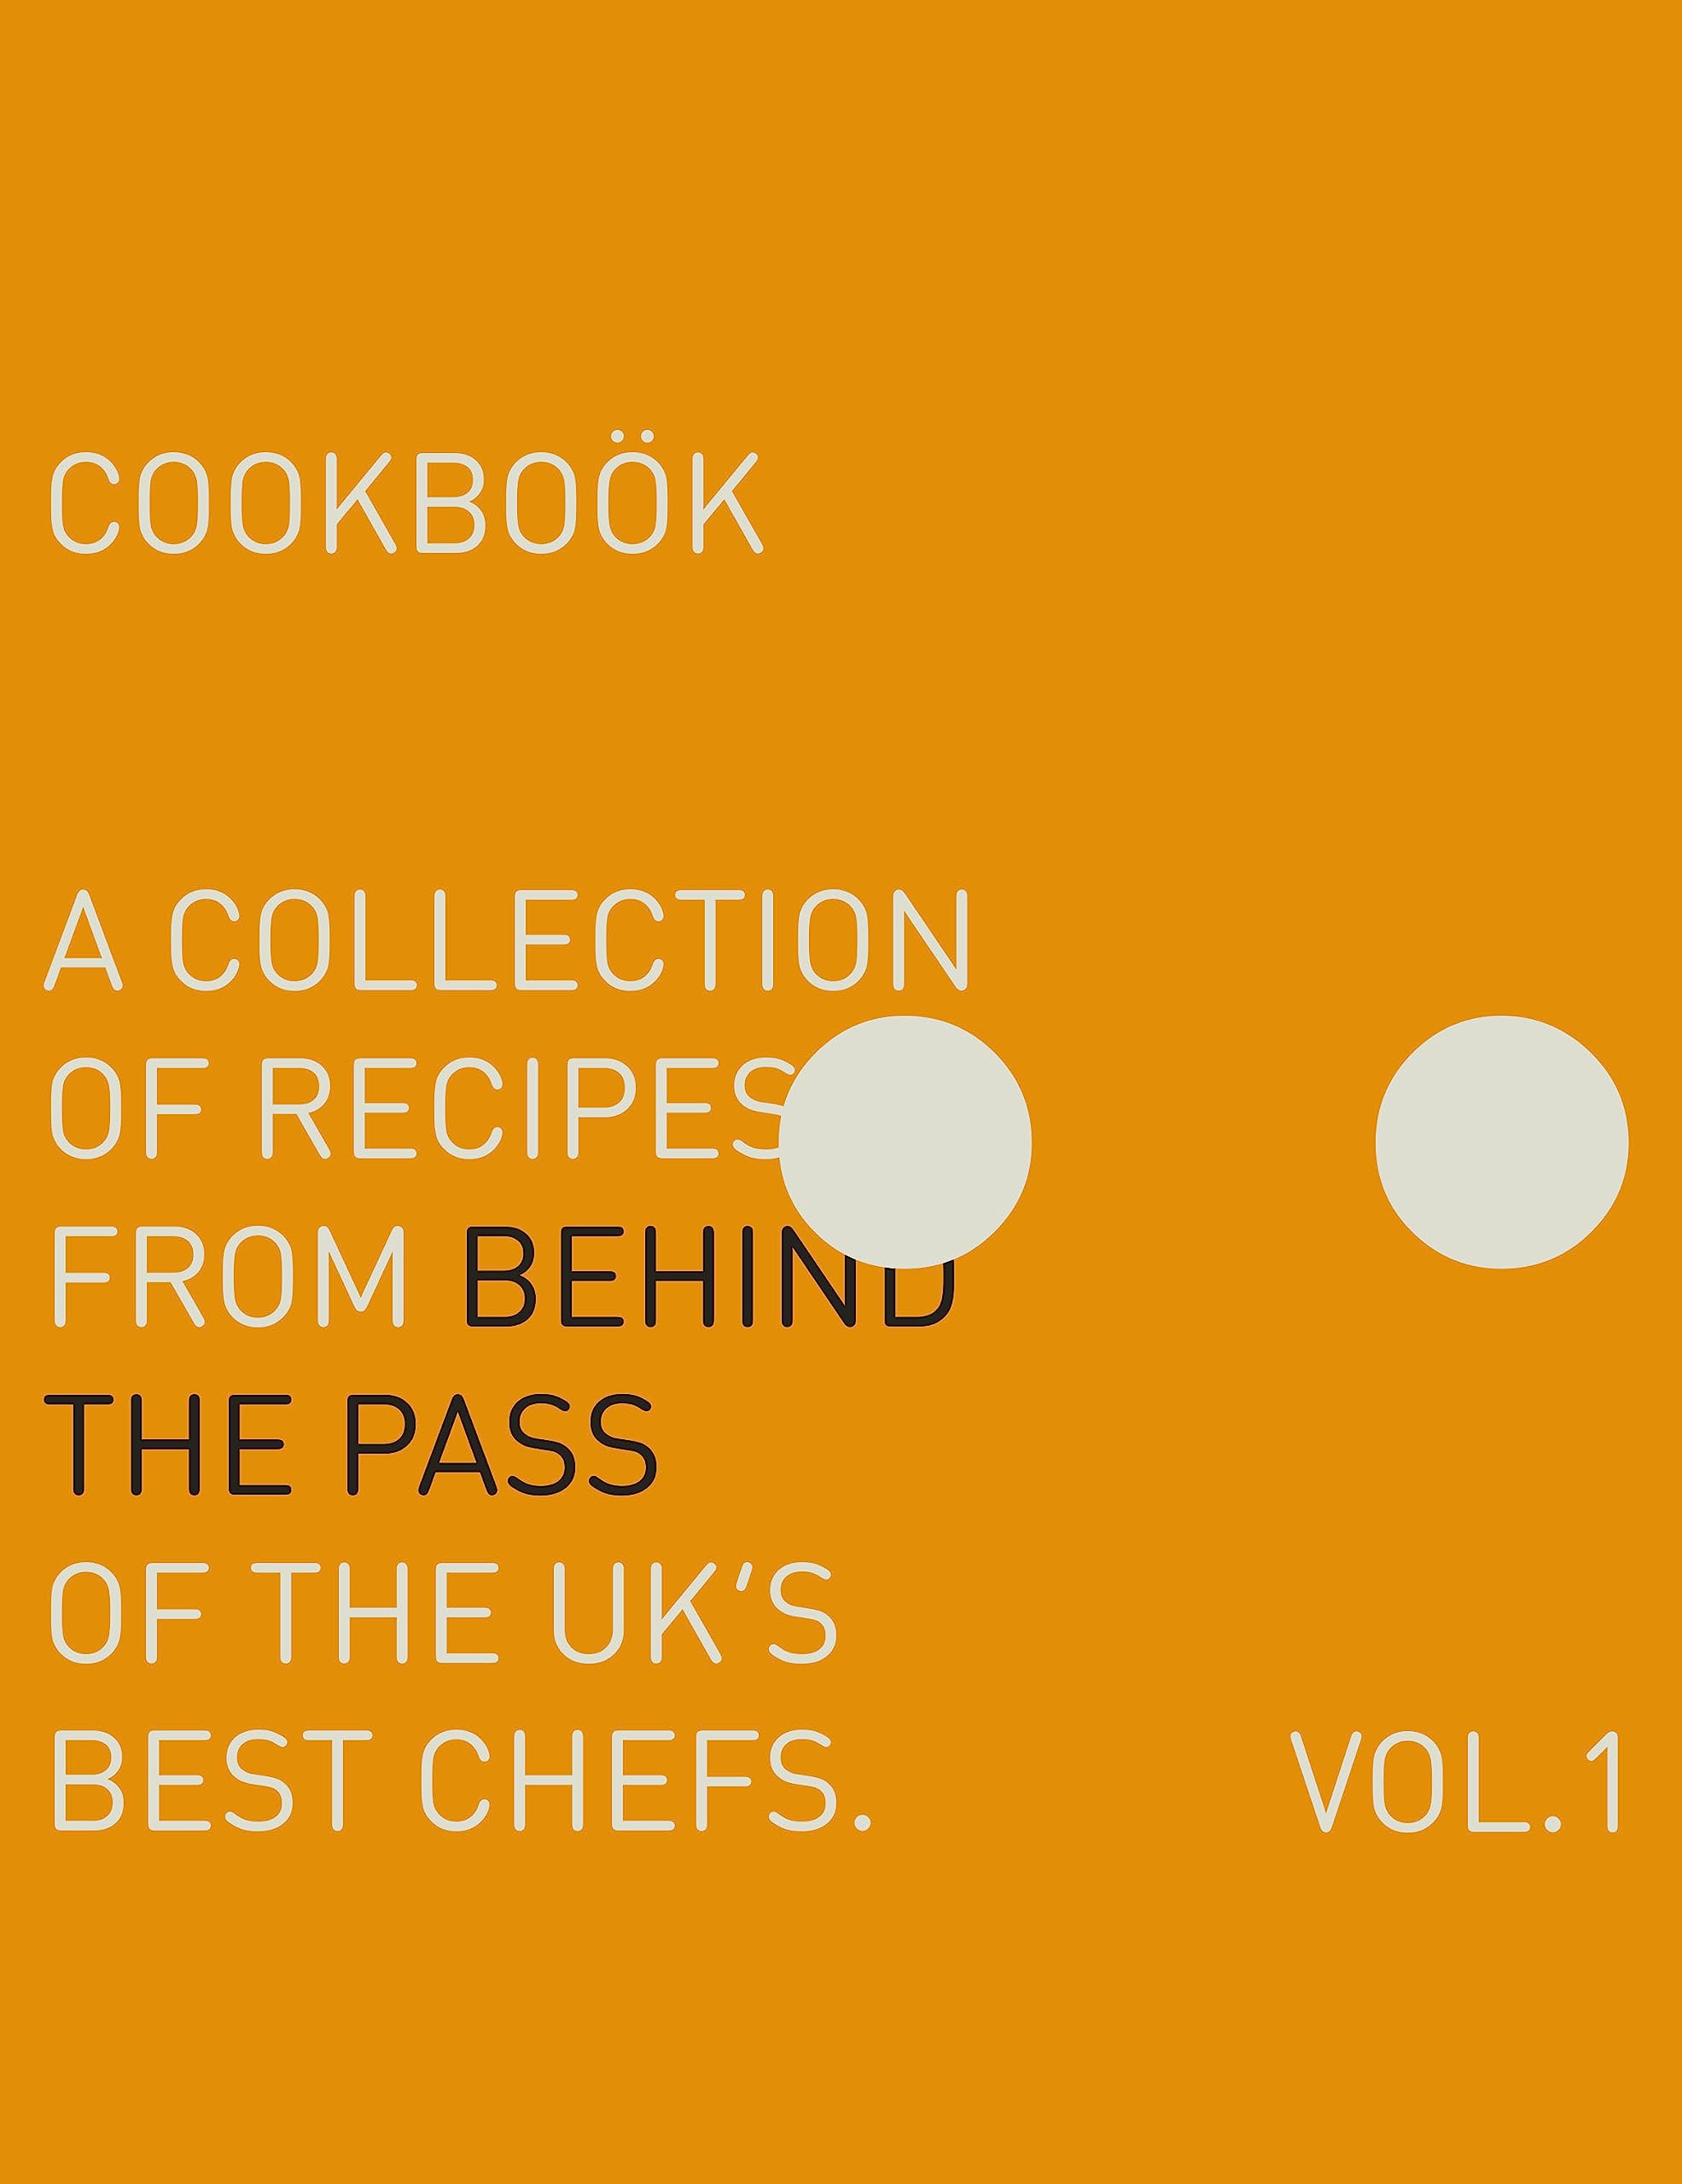 Behind The Pass: A Collection of Recipes from Behind the Pass of the UK’s Best Chefs